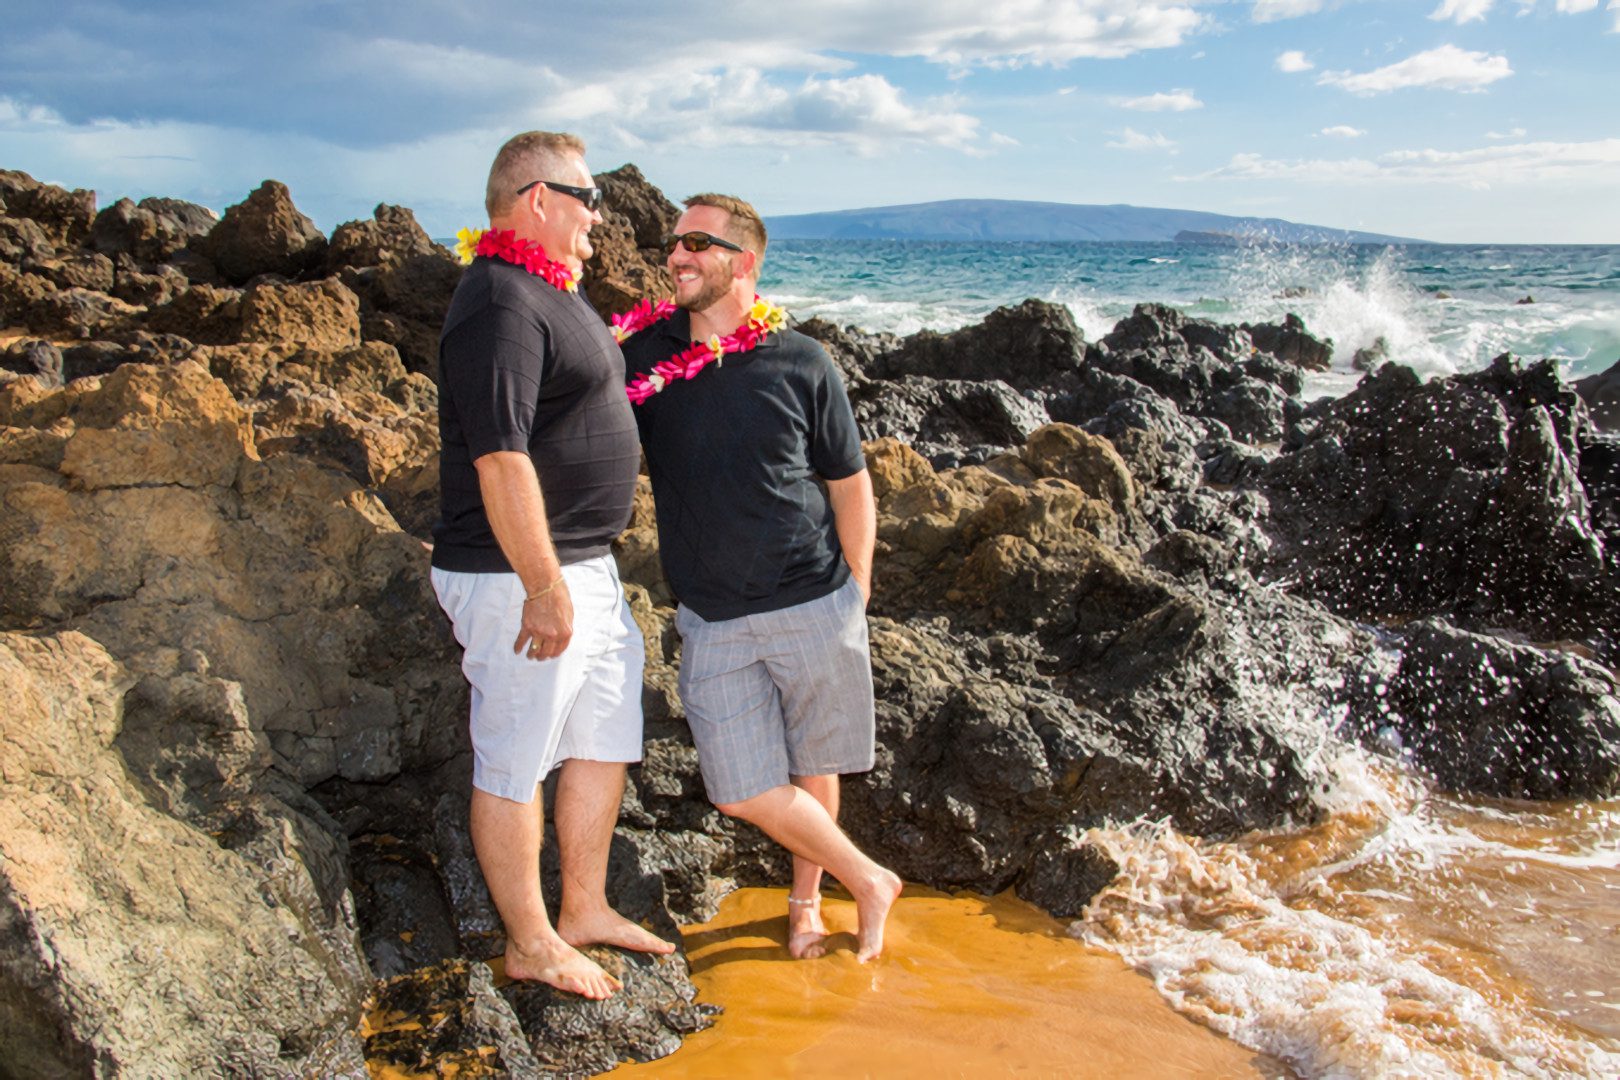 Wedding photography in Maui for a couple